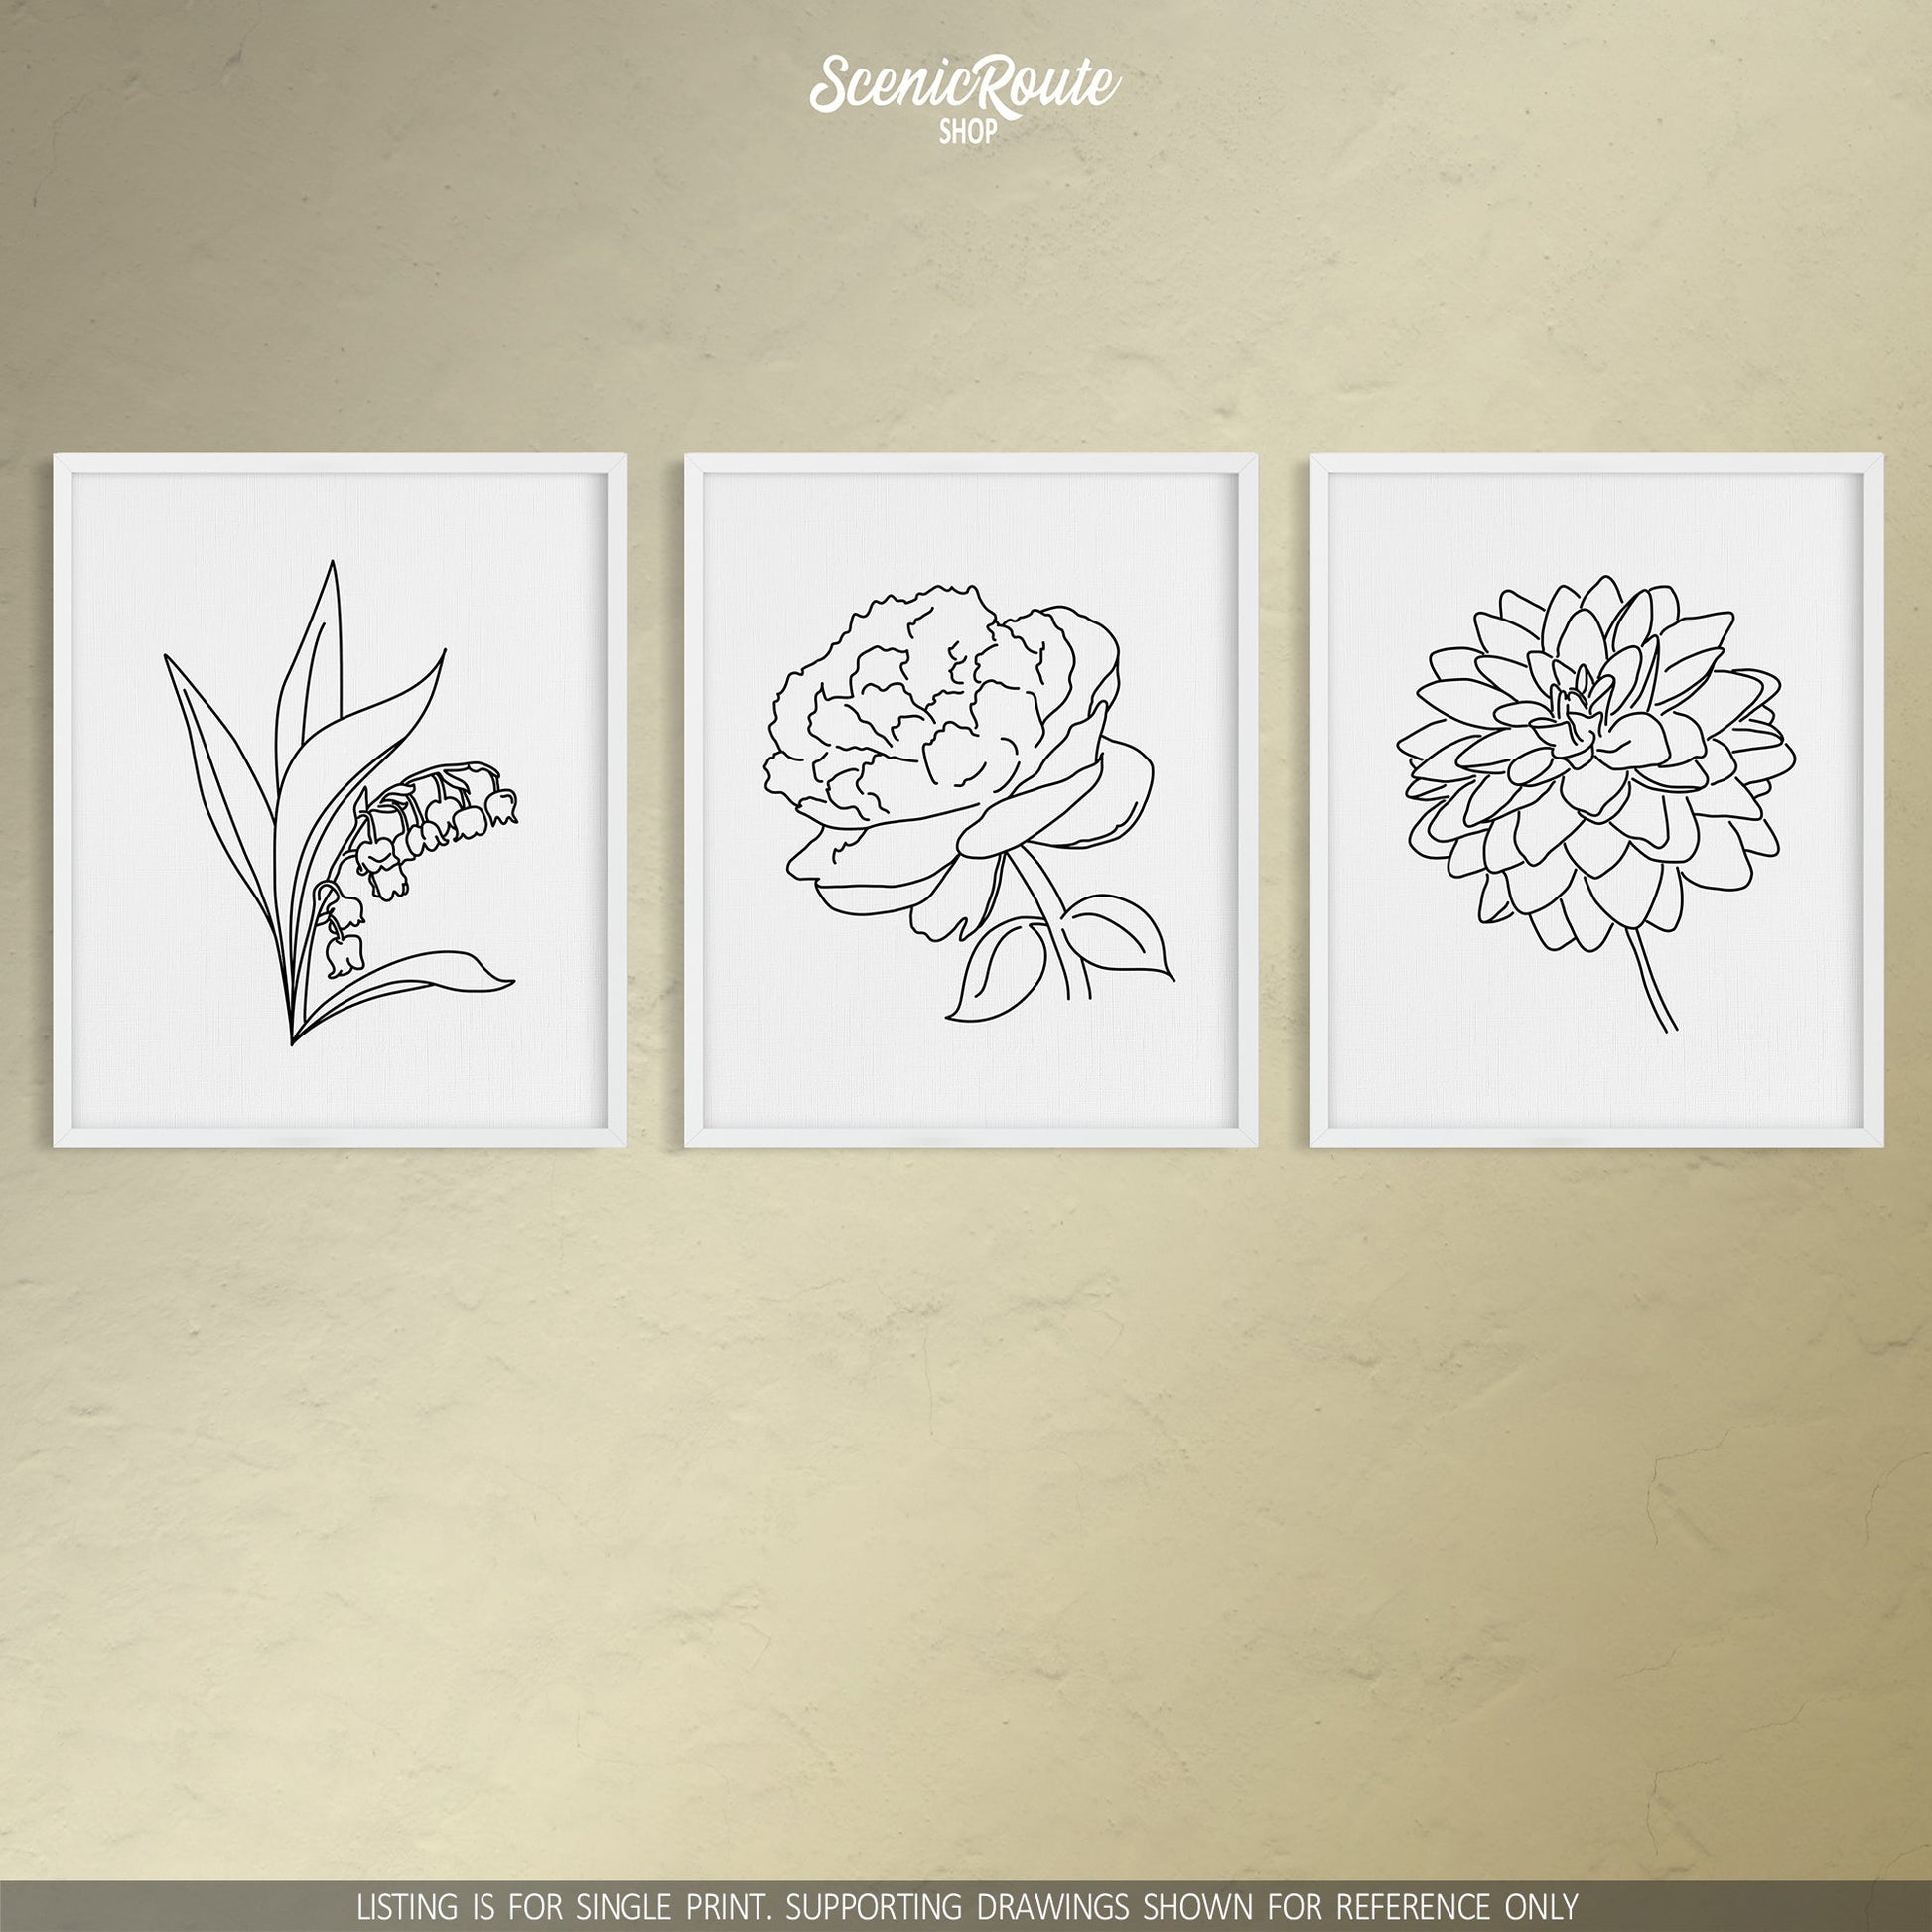 A group of three framed drawings on a white wall. The line art drawings include the Lily of the Valley Flower, Peony Flower, and Dahlia Flower